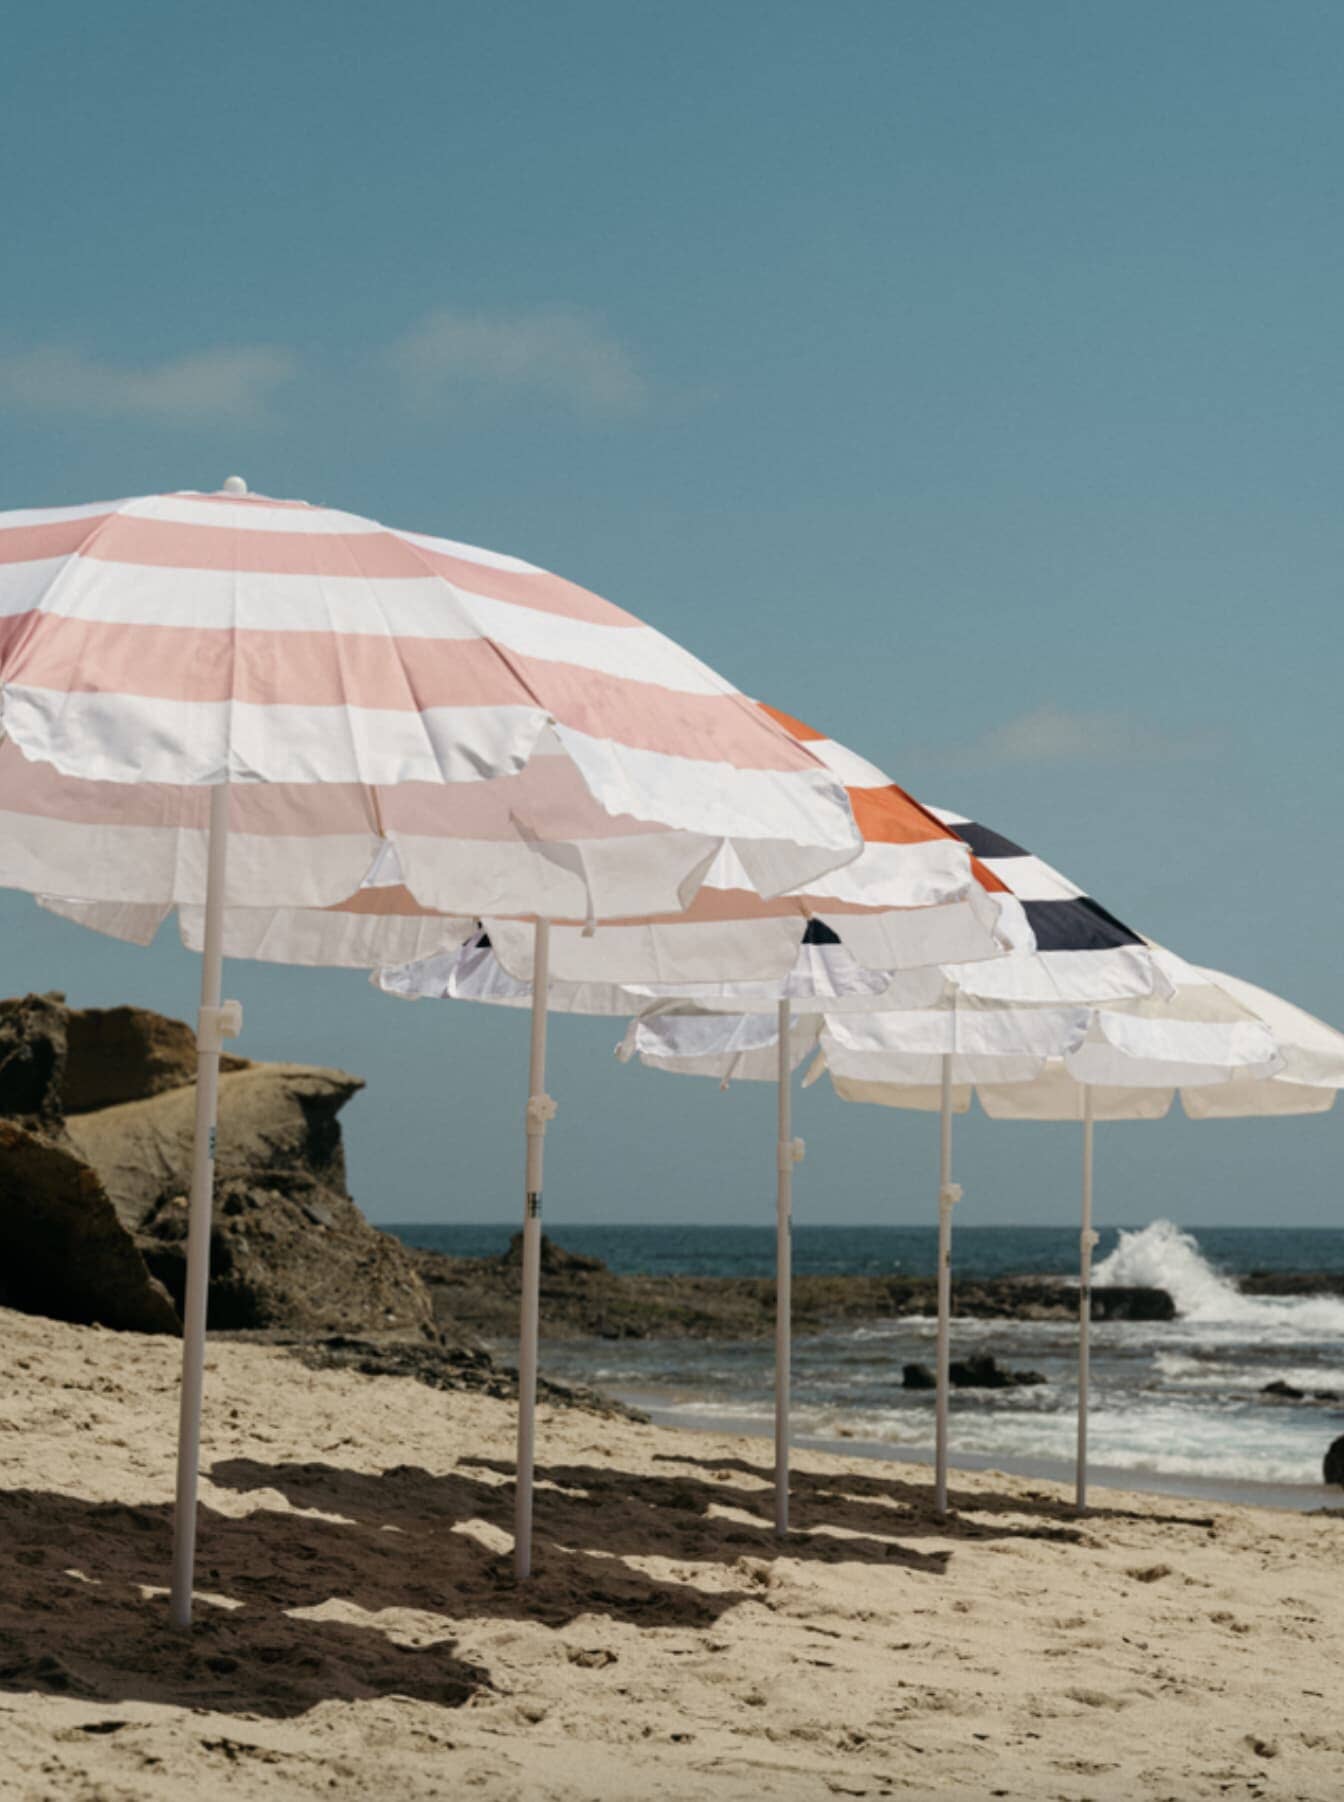 5 family umbrellas lined up on the beach